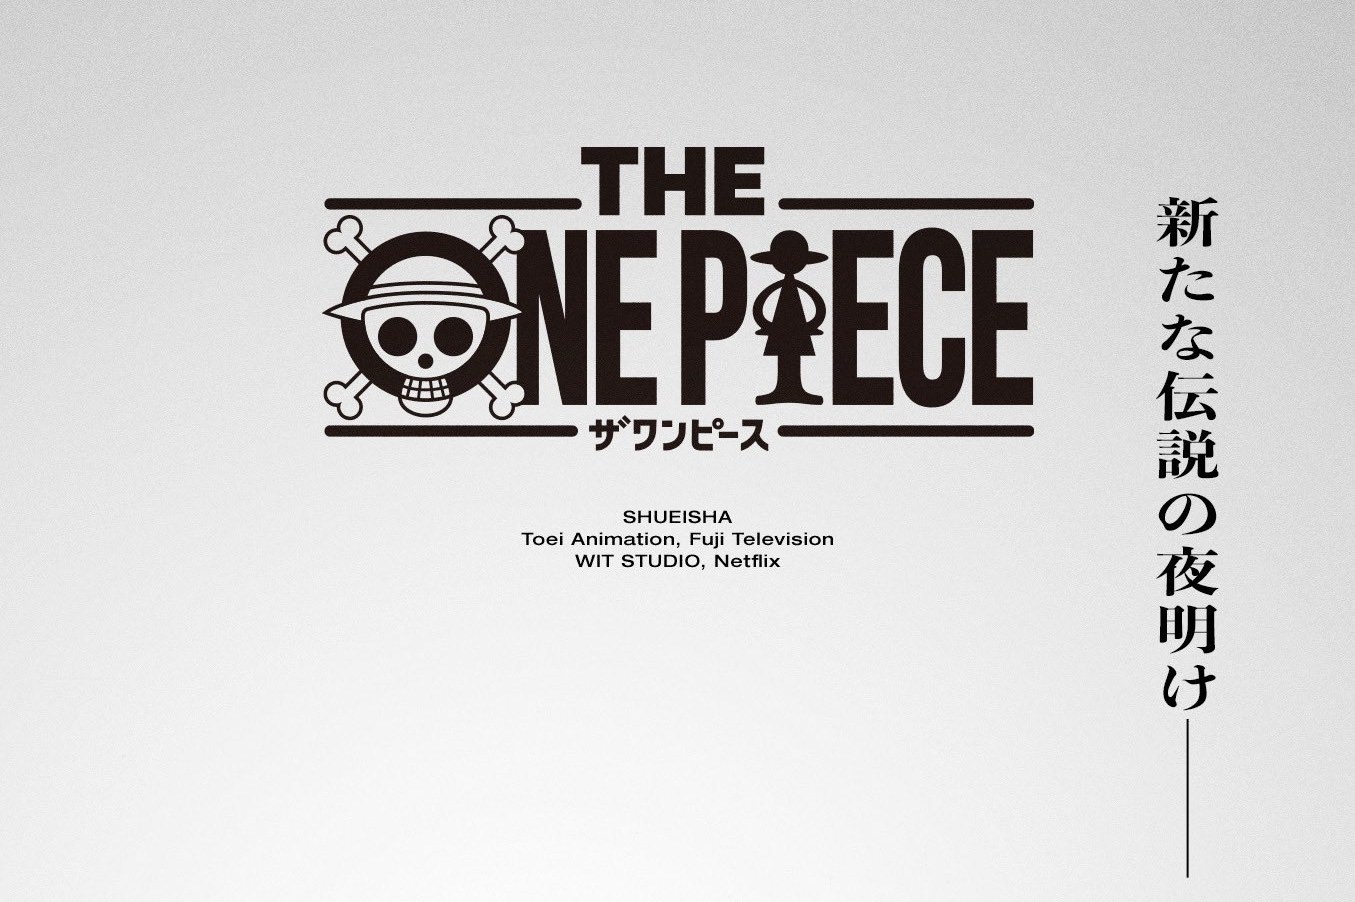 ONE PIECE 新シリーズ “THE ONE PIECE” 始動! 第1話から再アニメ化!